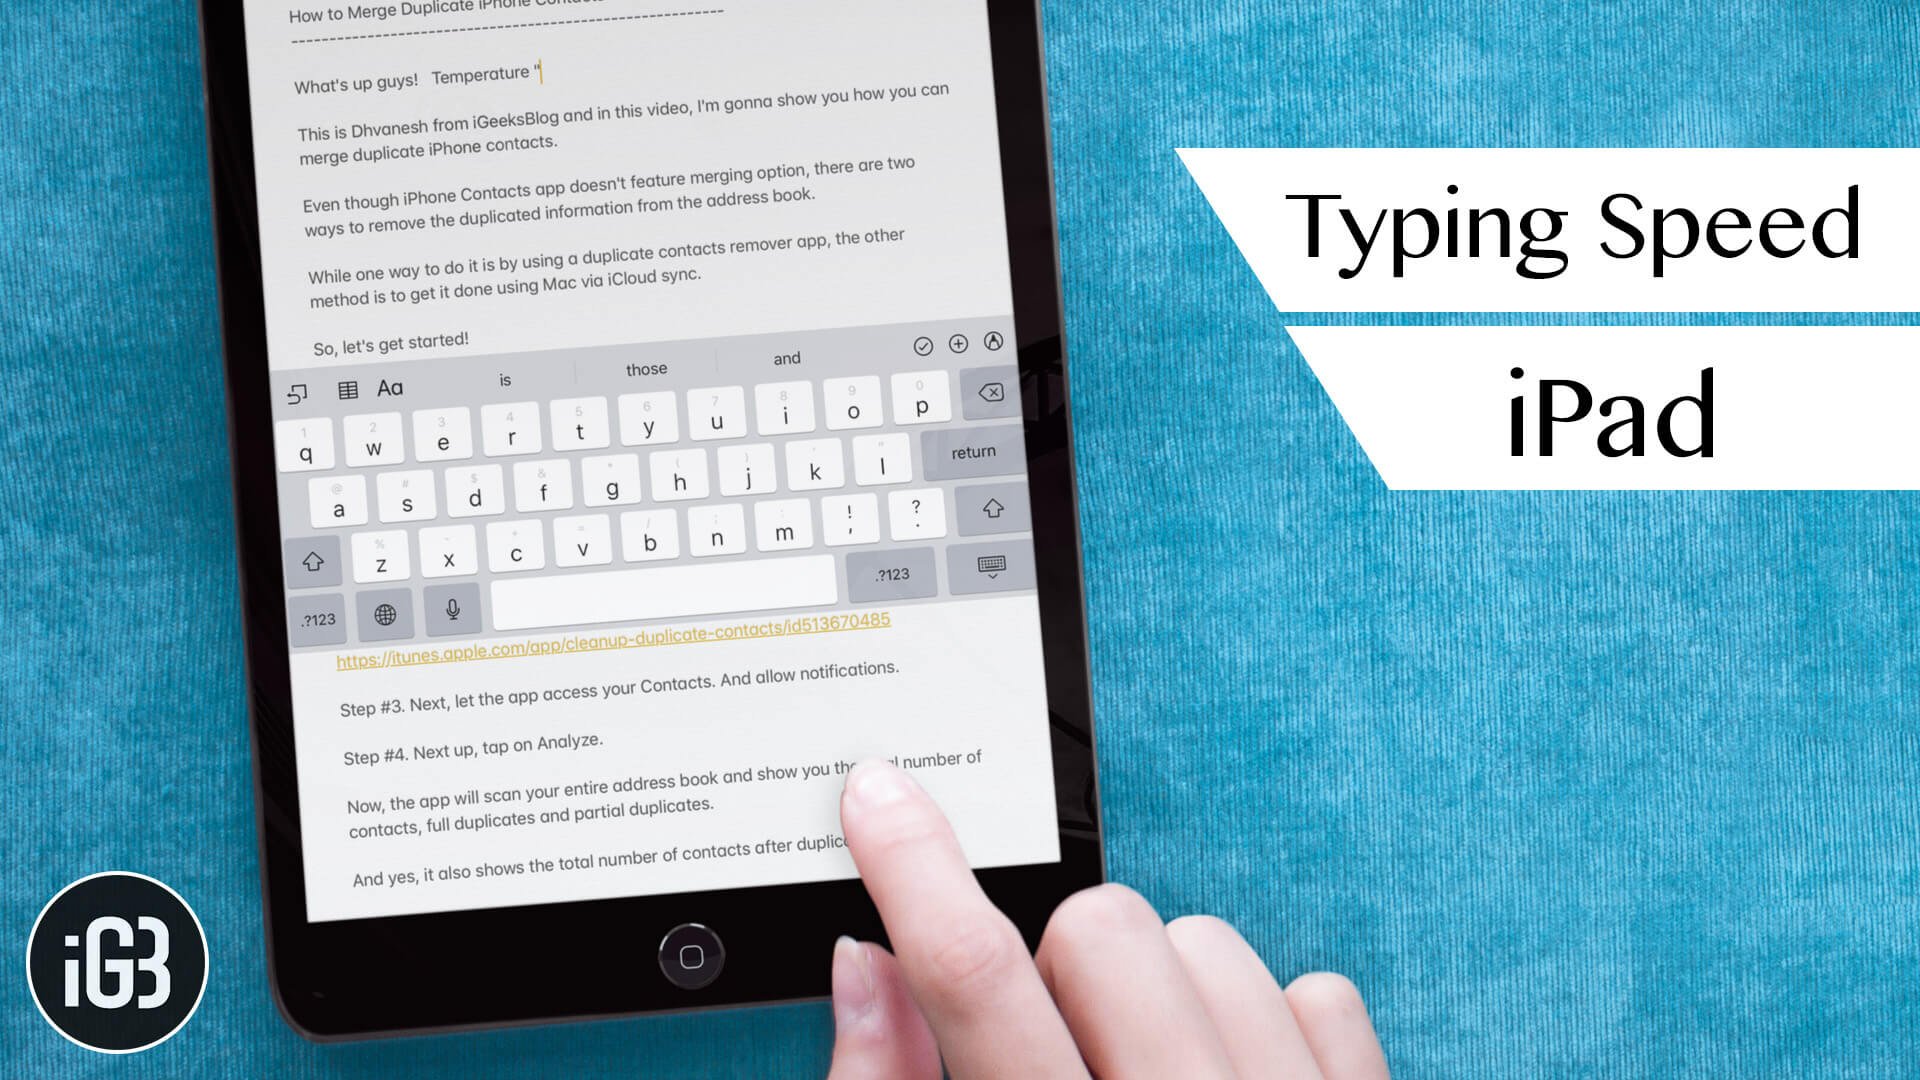 Ipad typing tips and tricks